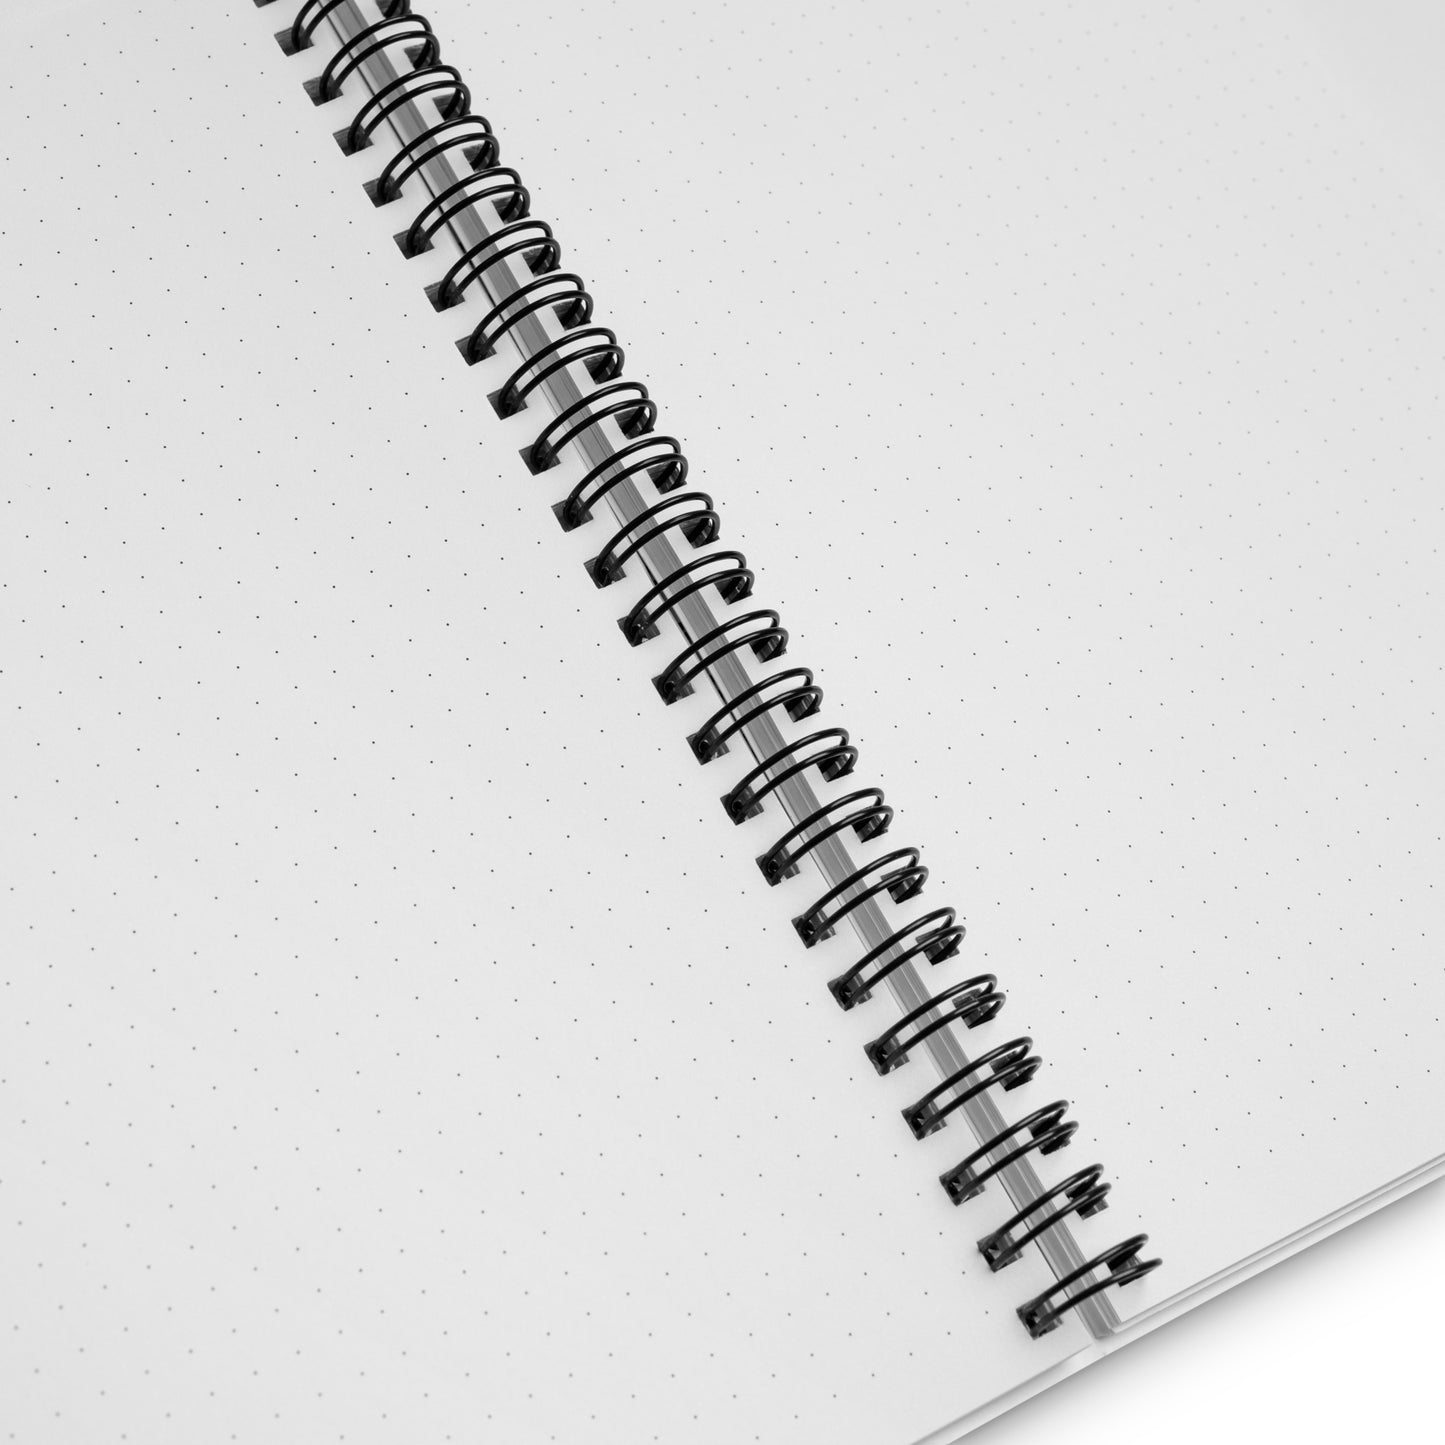 A close-up image of an open, wire-bound notebook with dot-grid pages.